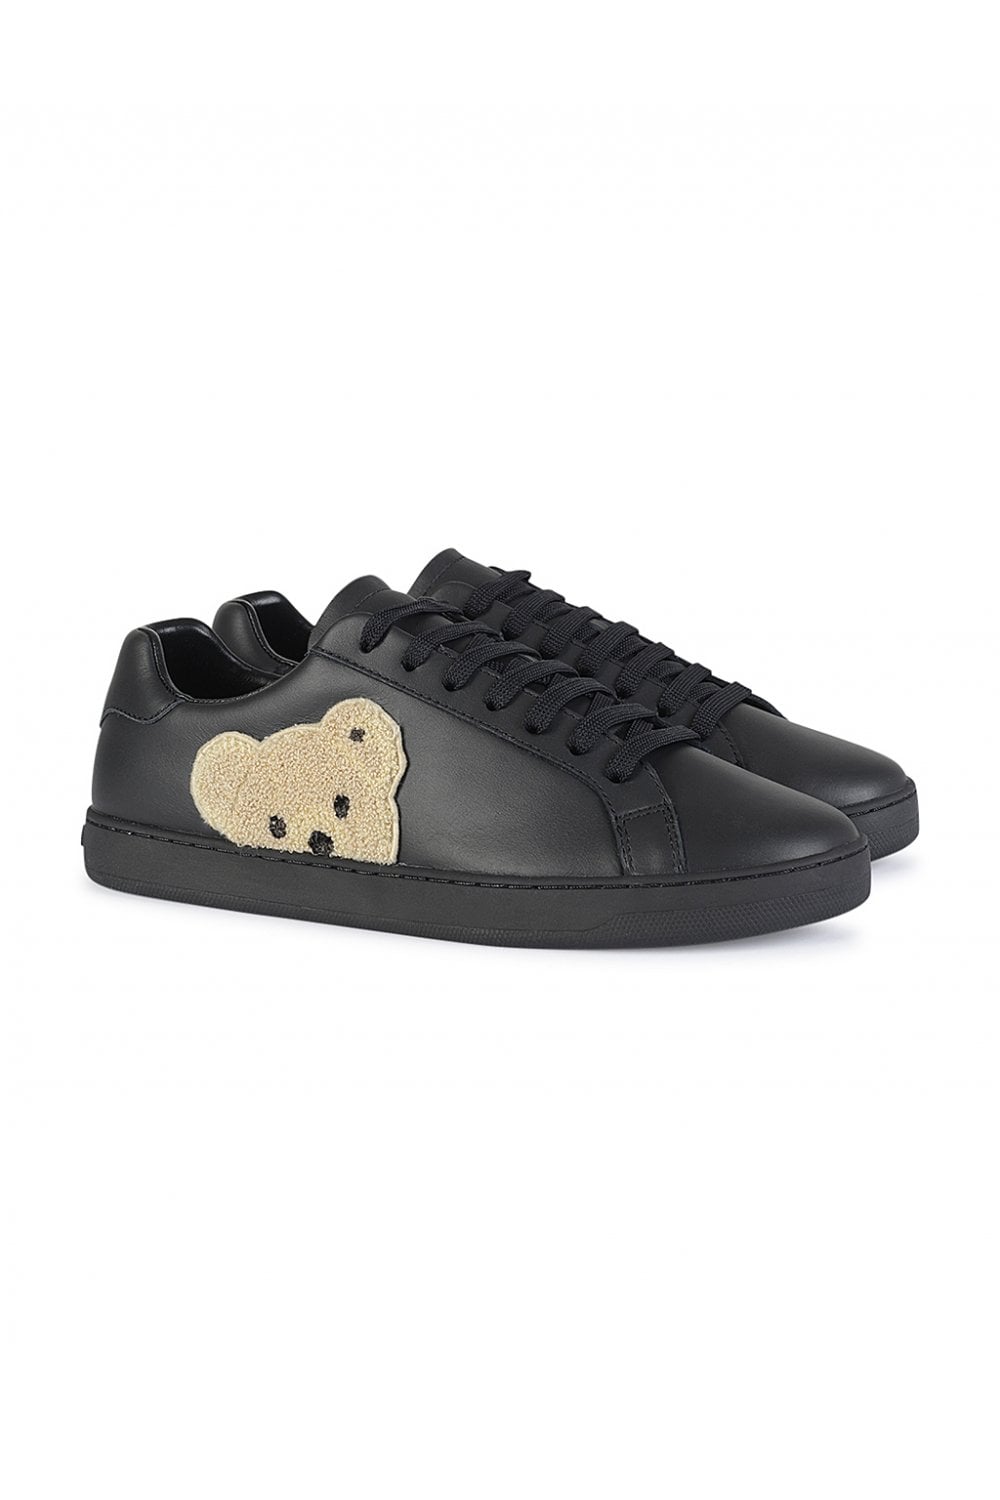 Palm Angels Teddy Low Trainers